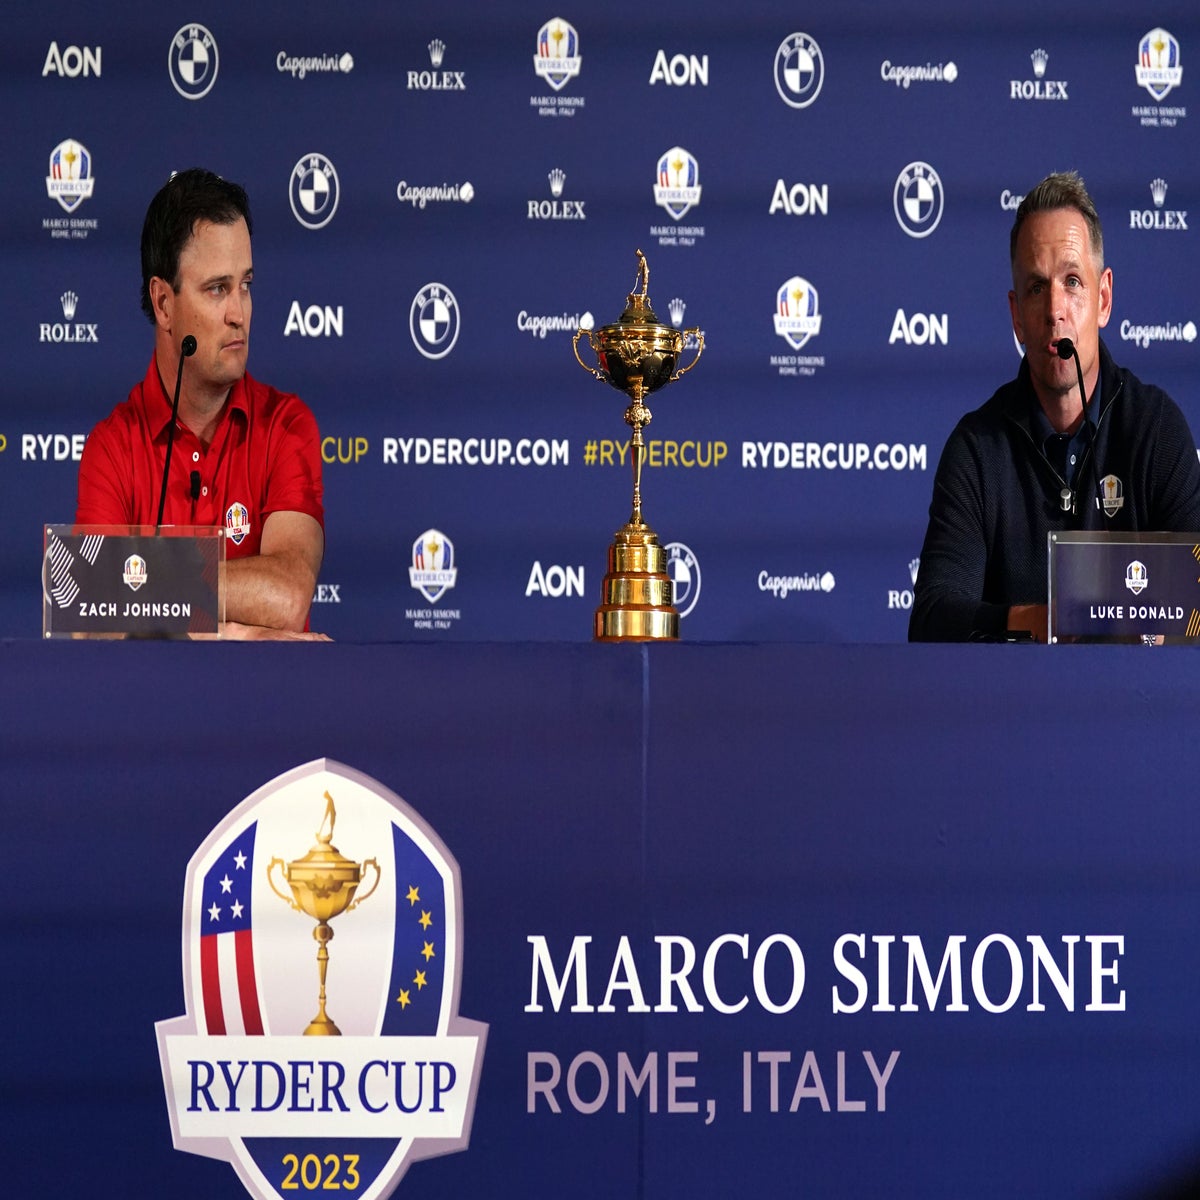 Dry run for European Ryder Cup captain Luke Donald at the Italian Open